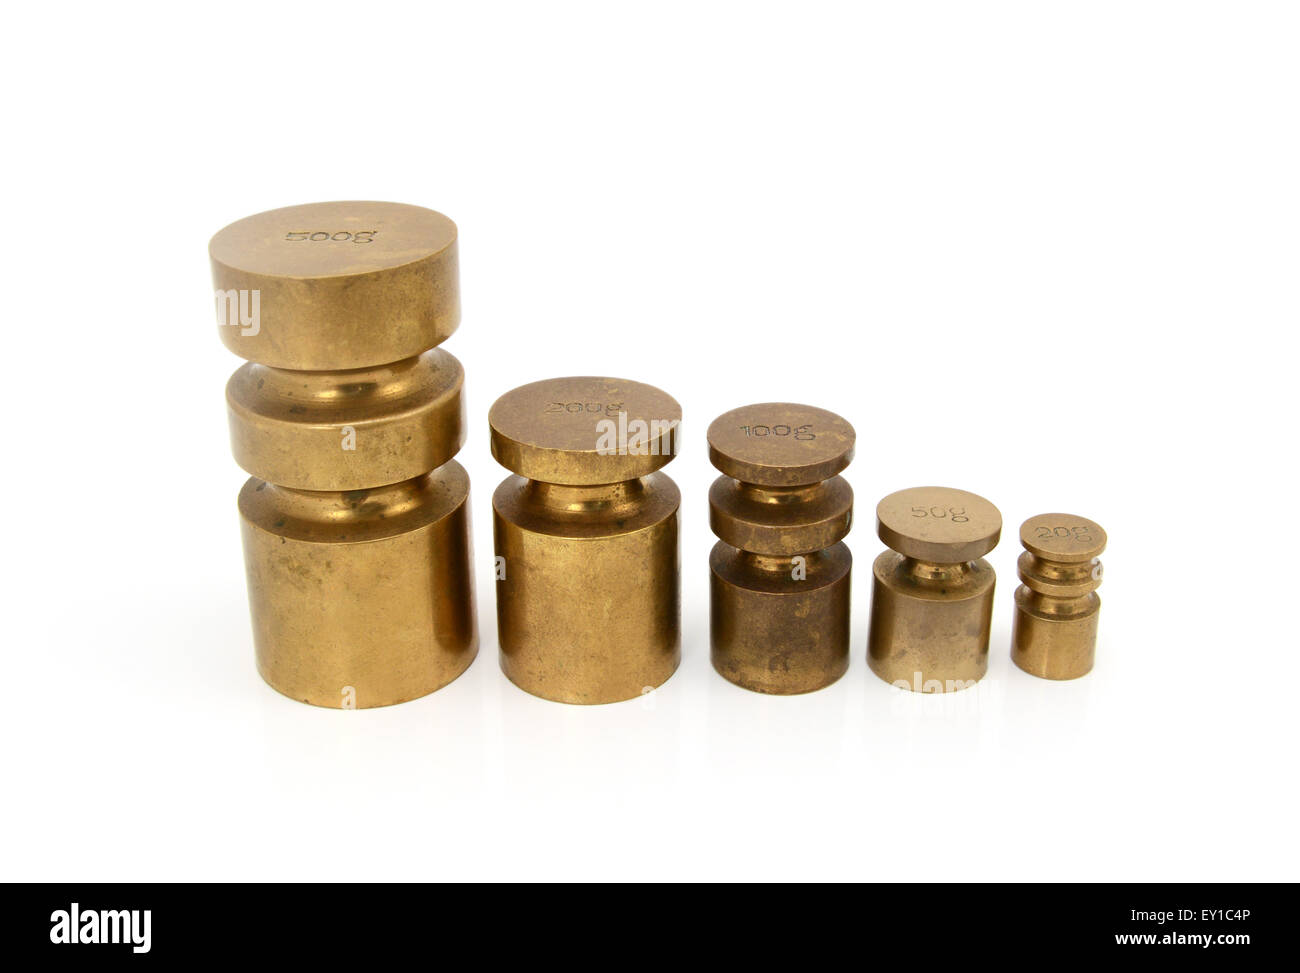 Set of brass metric weights in grams - 500g, 200g, 100g, 50g and 20g metal cylinders Stock Photo